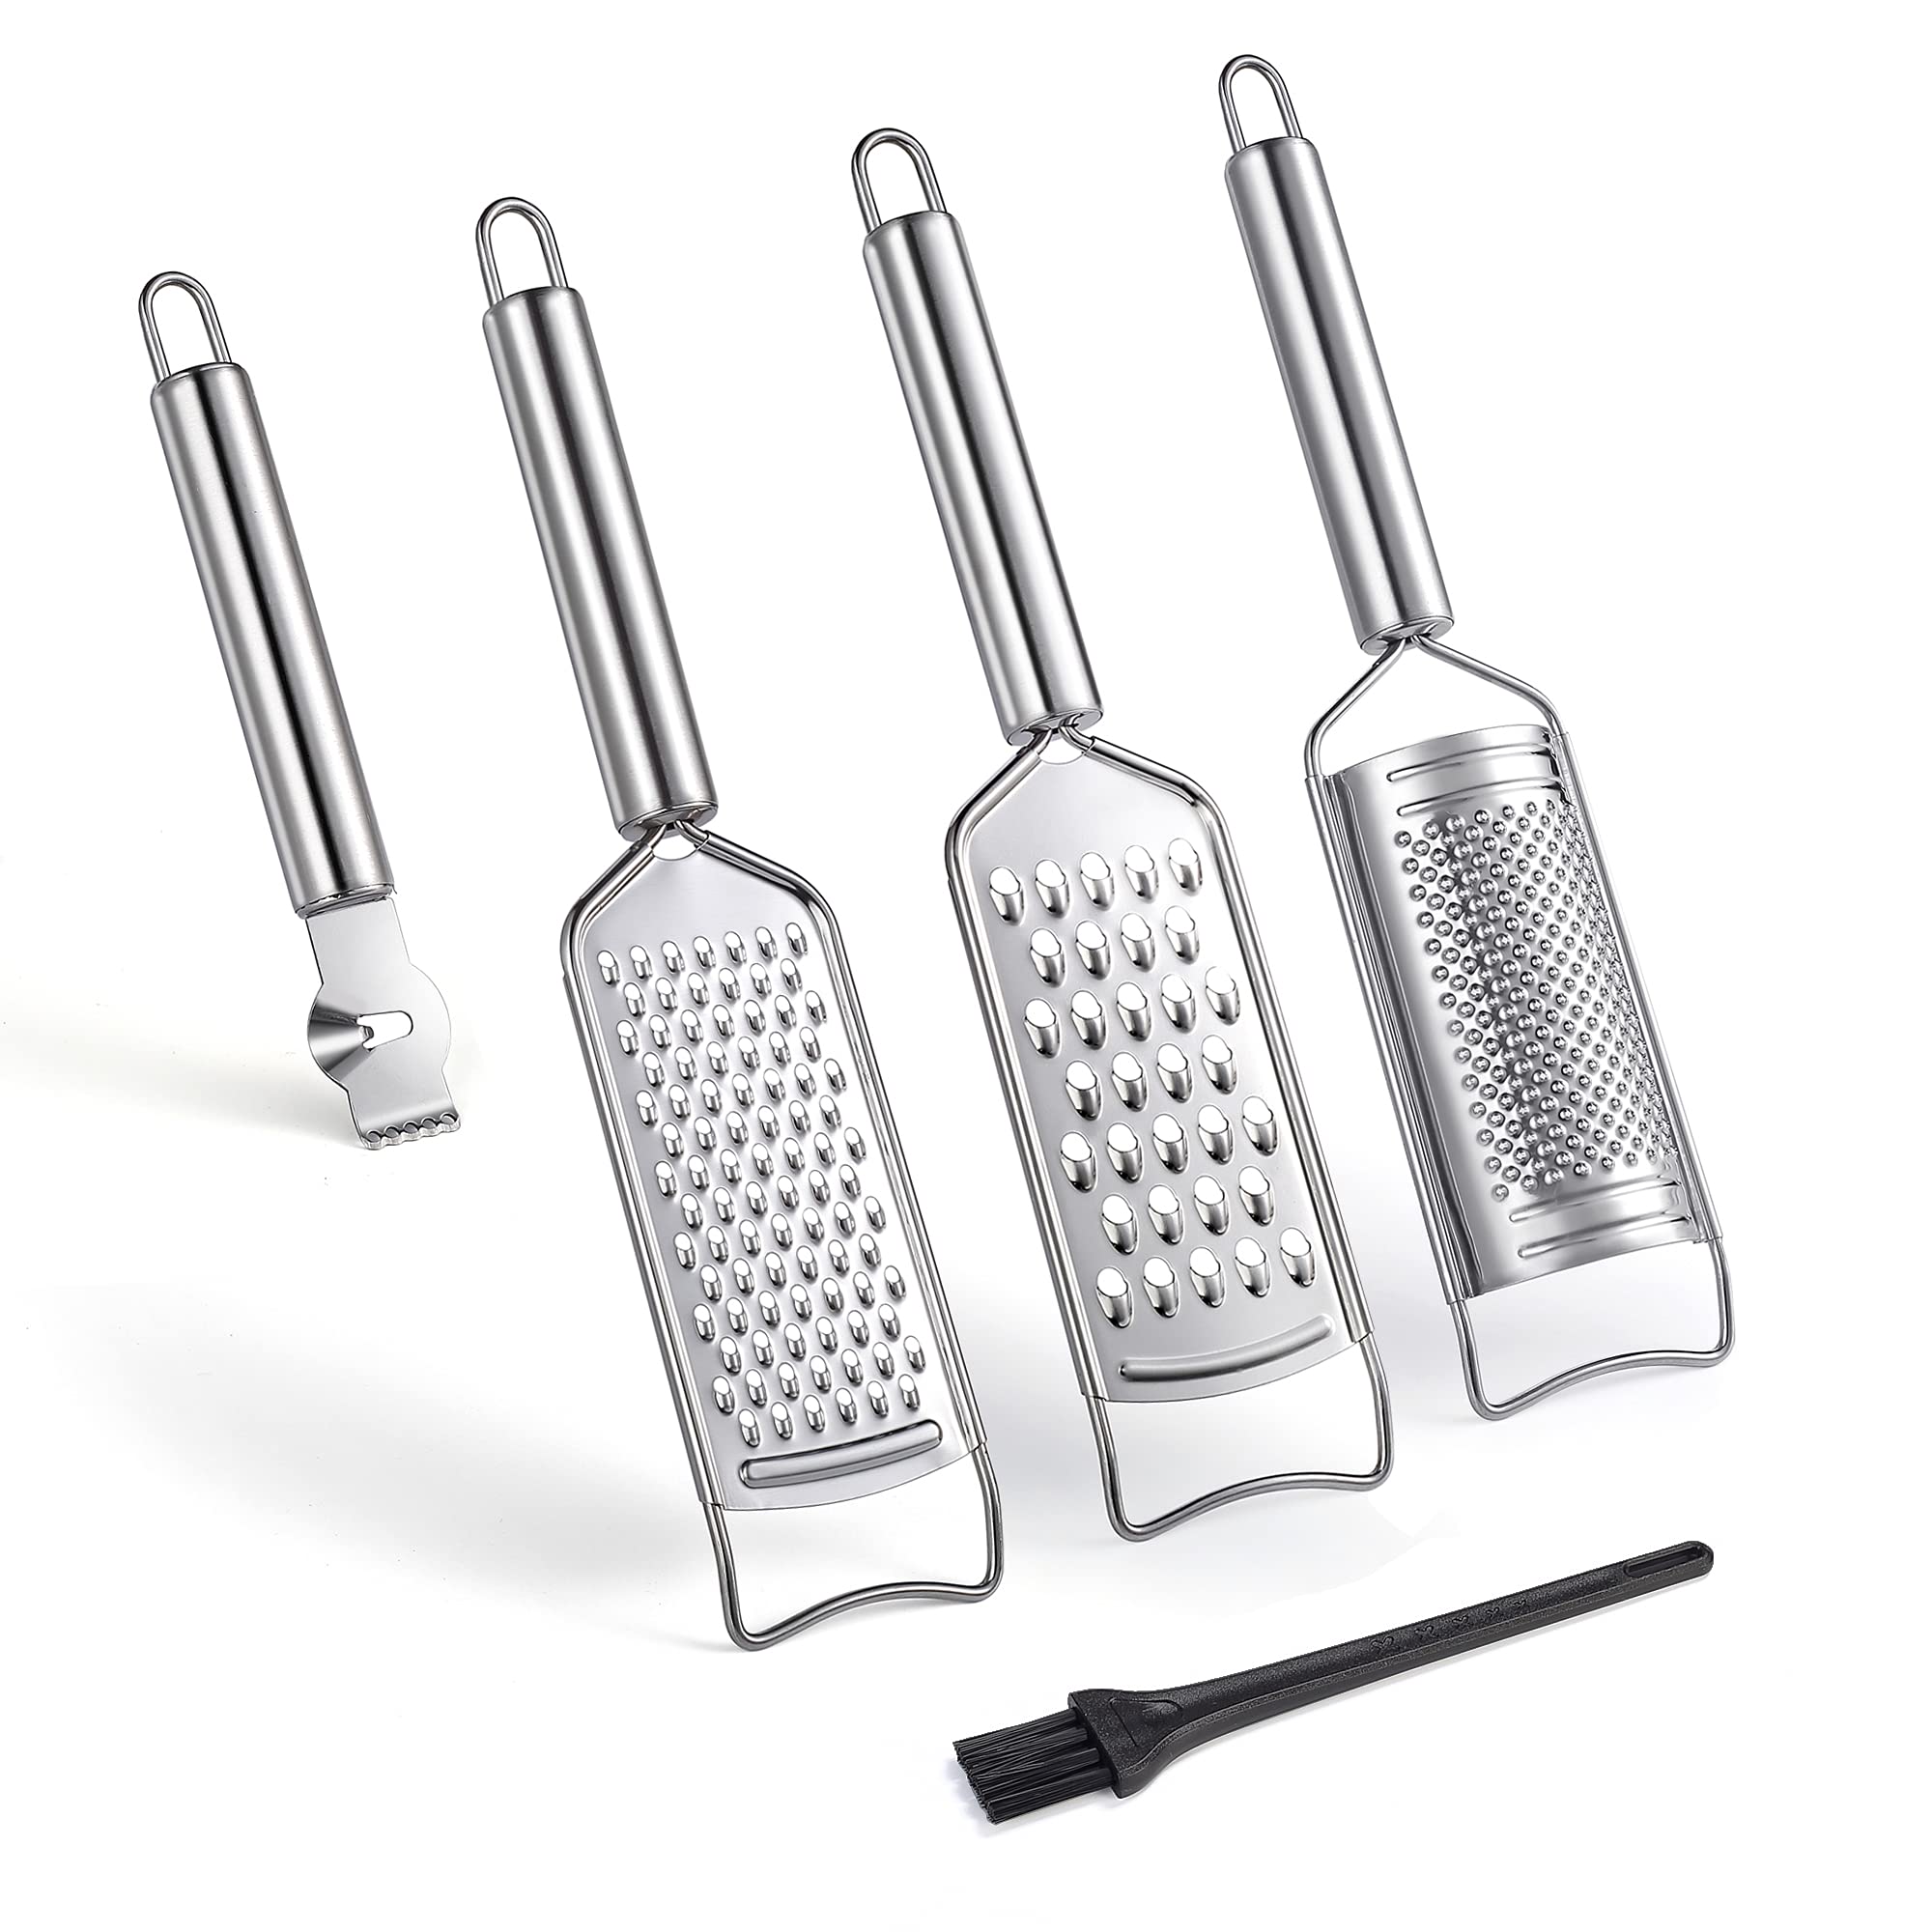 Tongjude Stainless Steel Cheese Grater Set, Set of 5 Kitchen Grater & Peeler & Slicer, Lemon Zester with Cleaning Brush for Vegetable, Fruit, Chocolate